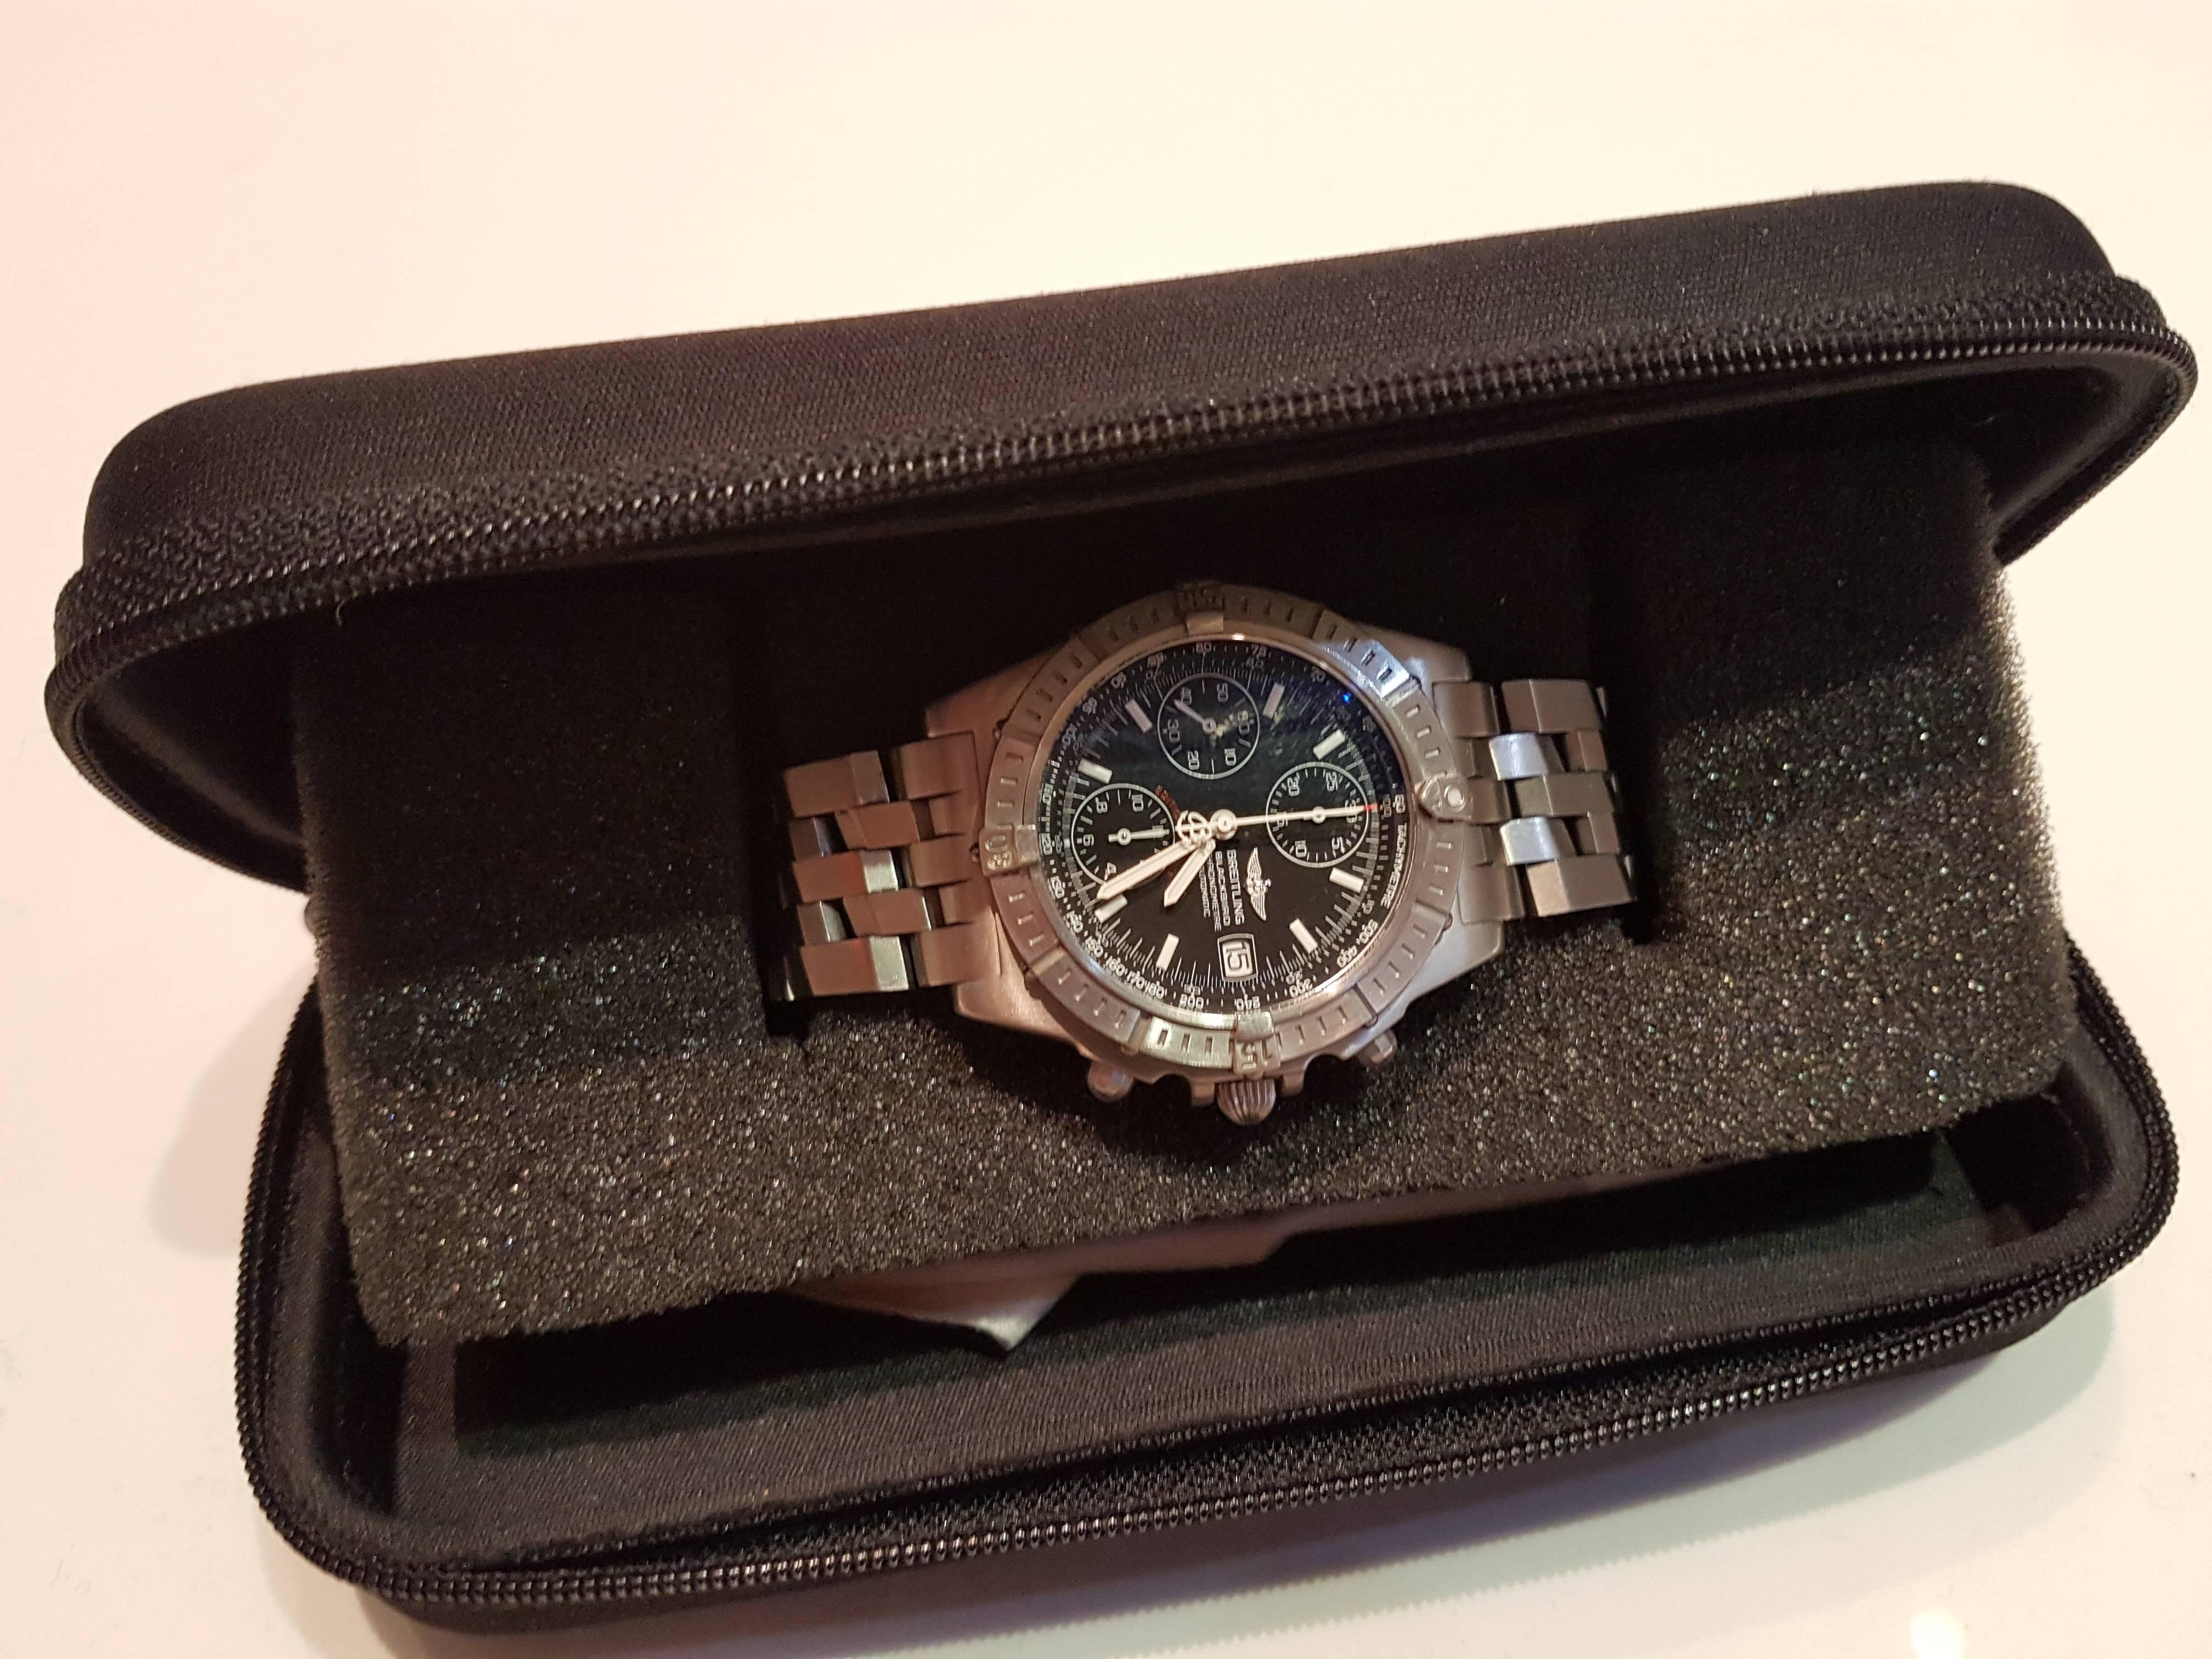 Breitling A13353 Blackbird Stainless Steel Chronograph Special Edition Watch For Sale 2